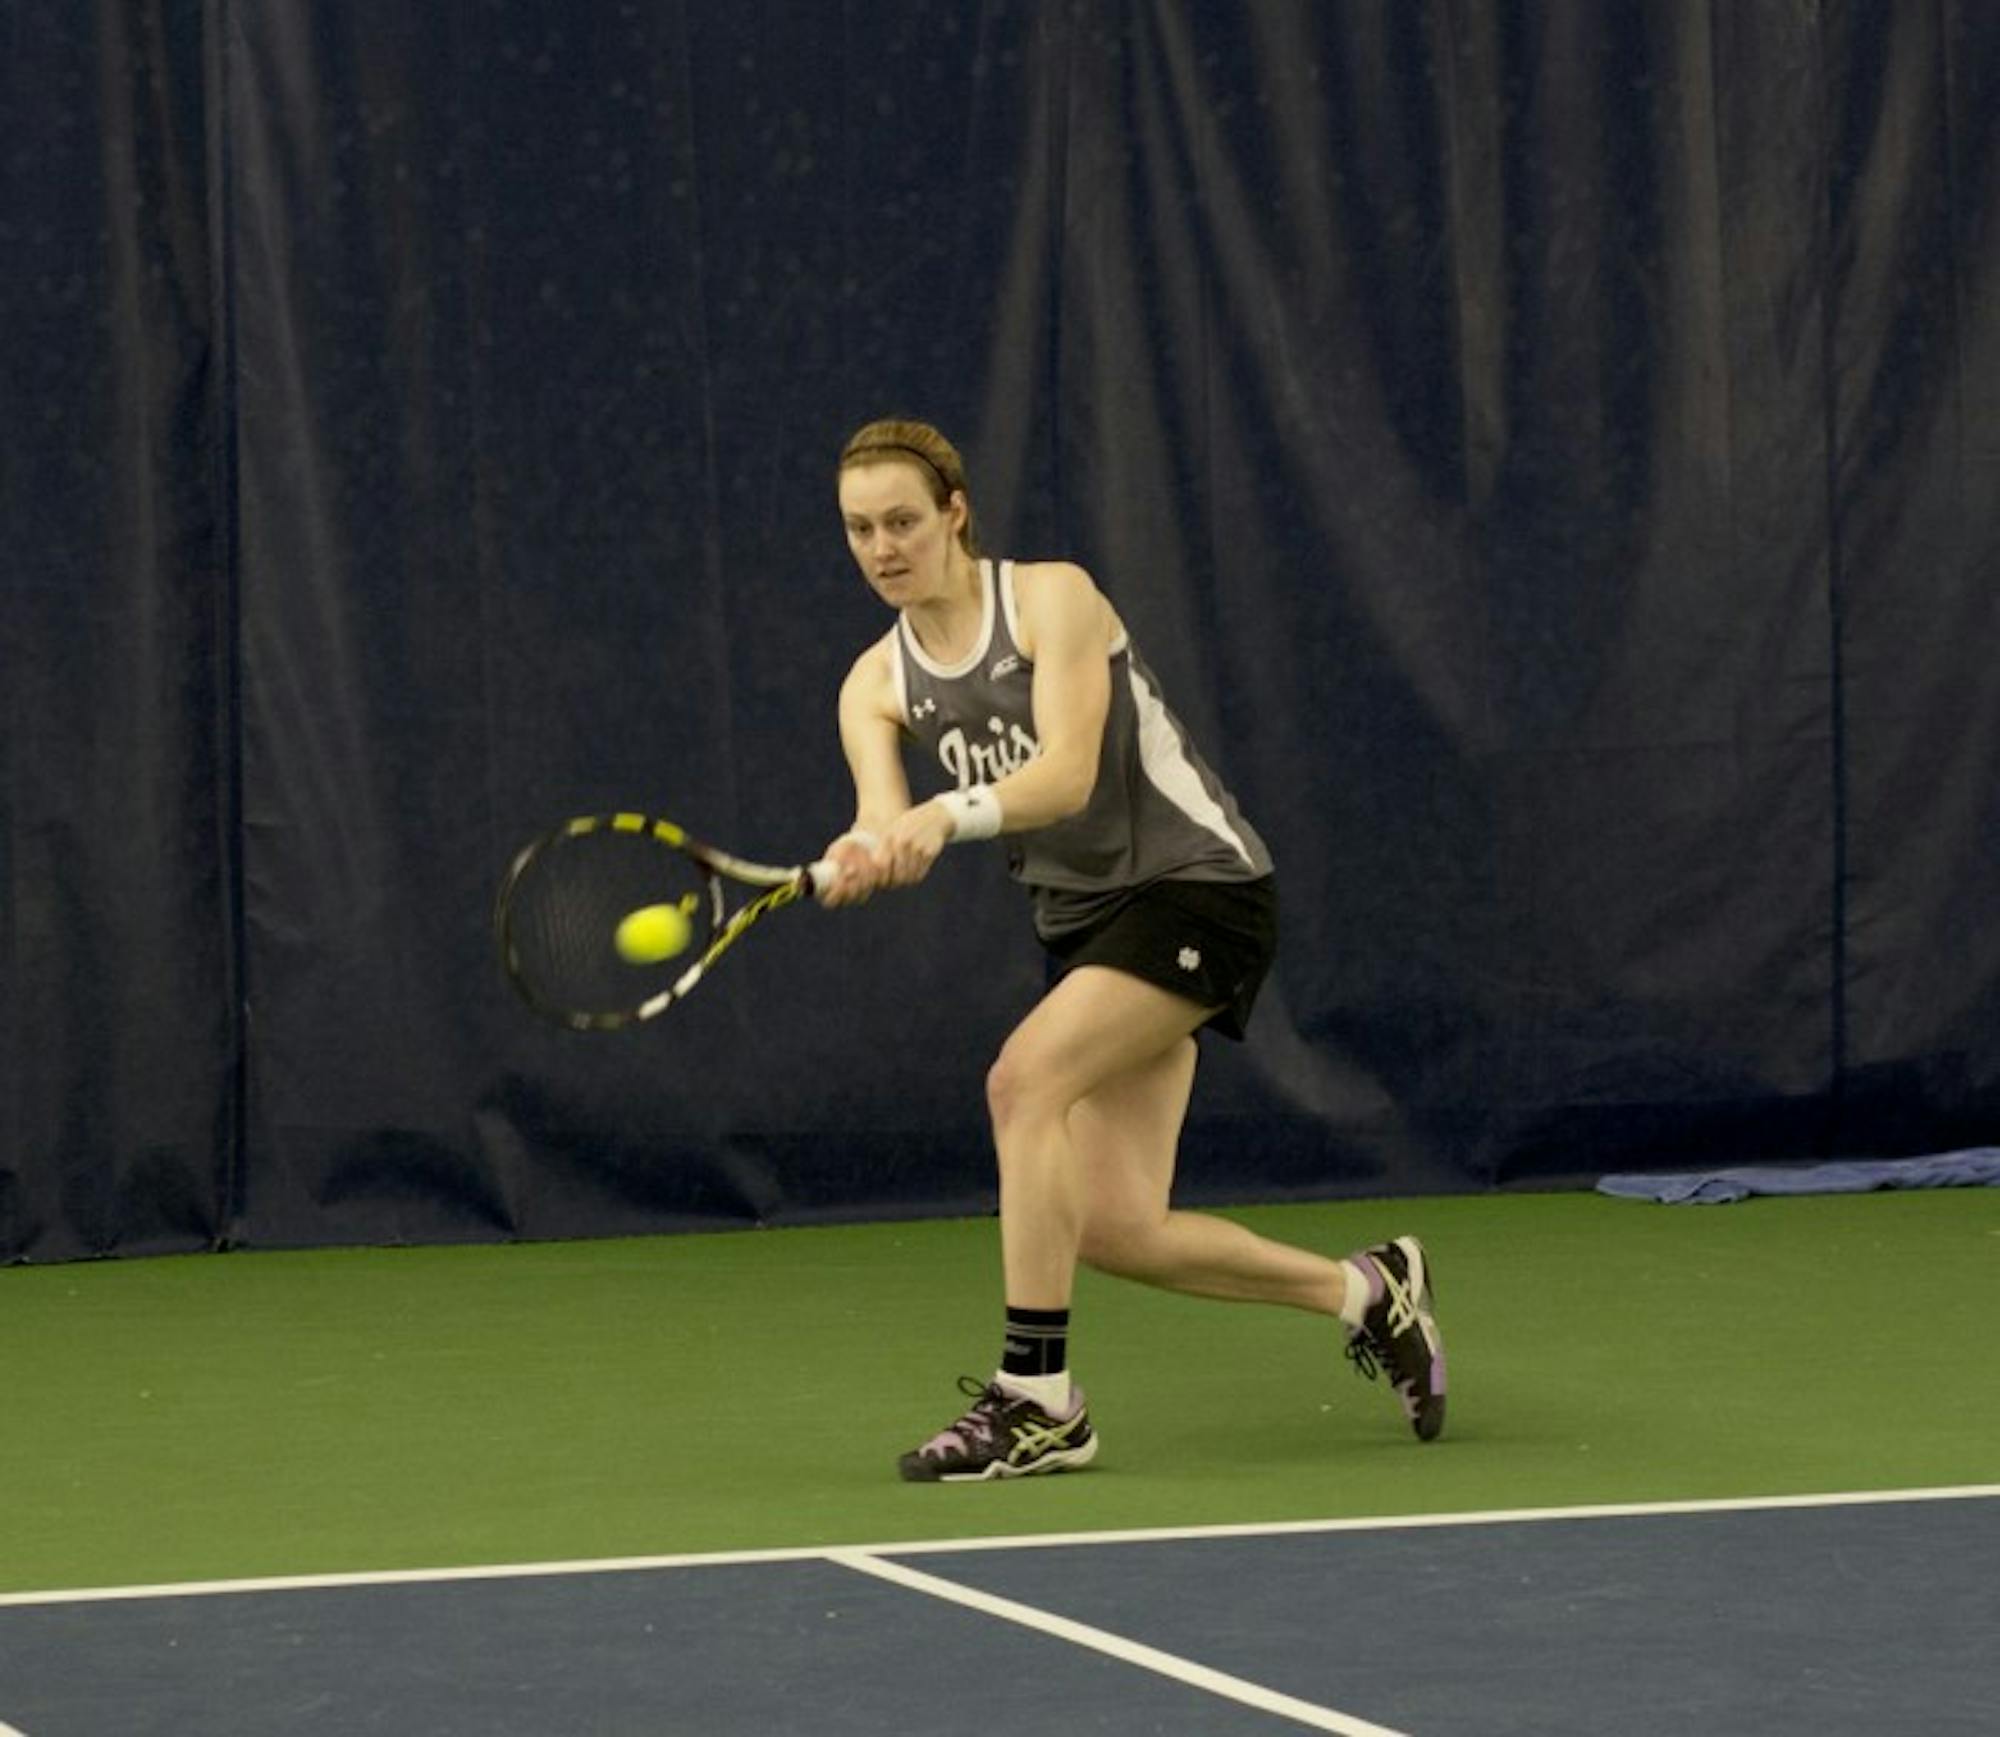 Irish sophomore Brooke Broda connects on a backhand during Notre Dame's 6-1 win over Indiana on Feb. 20 at Eck Tennis Pavilion.